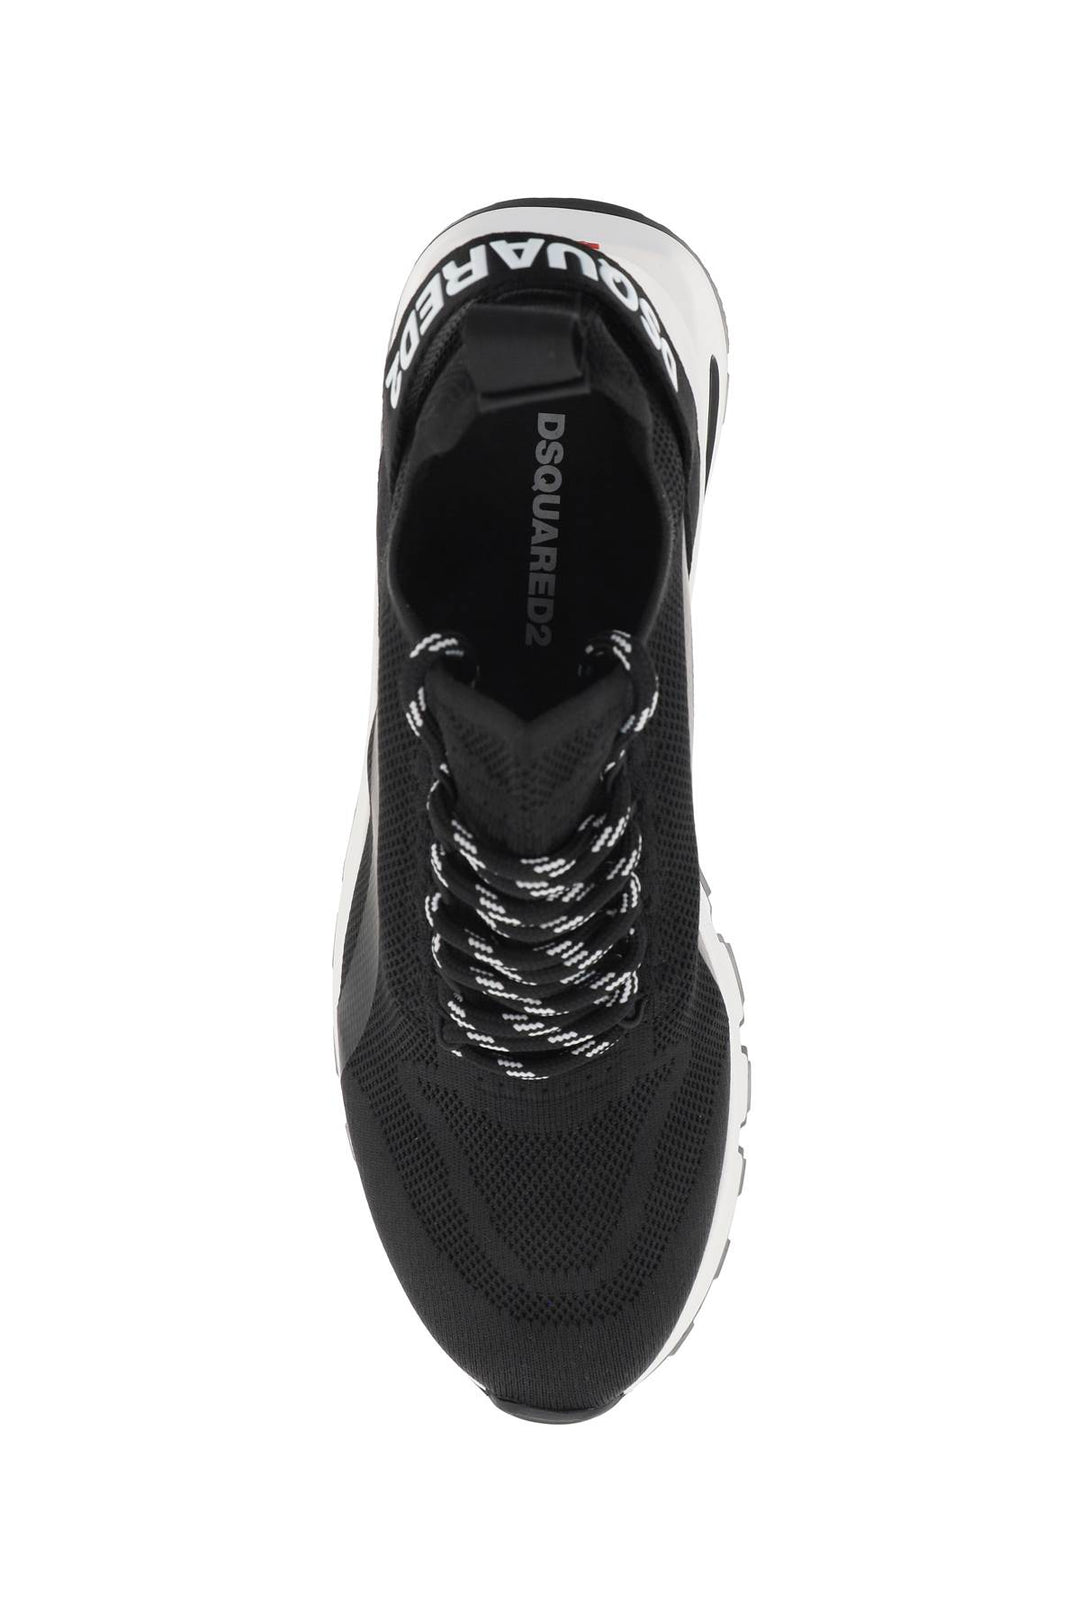 Dsquared2 Run Ds2 Sneakers   Black